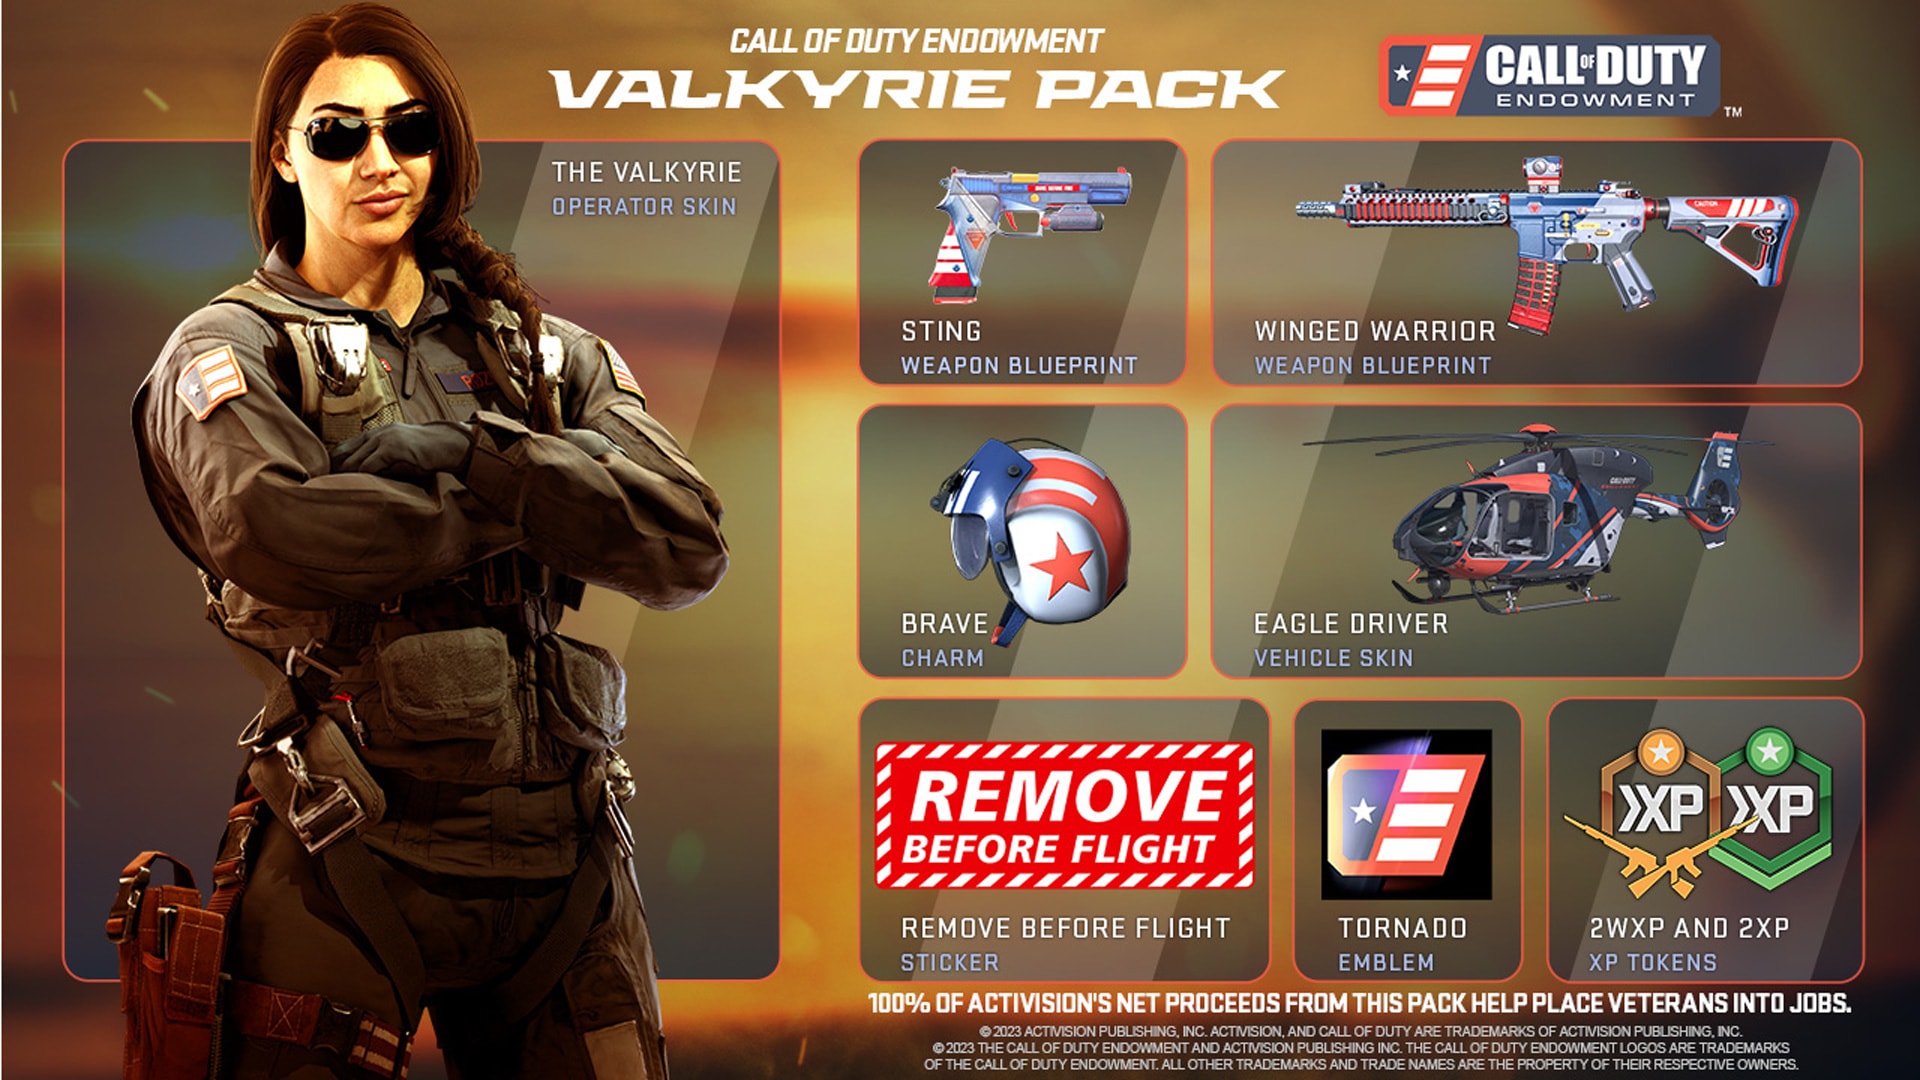 Support veterans with the Call of Duty Endowment Valkyrie Pack